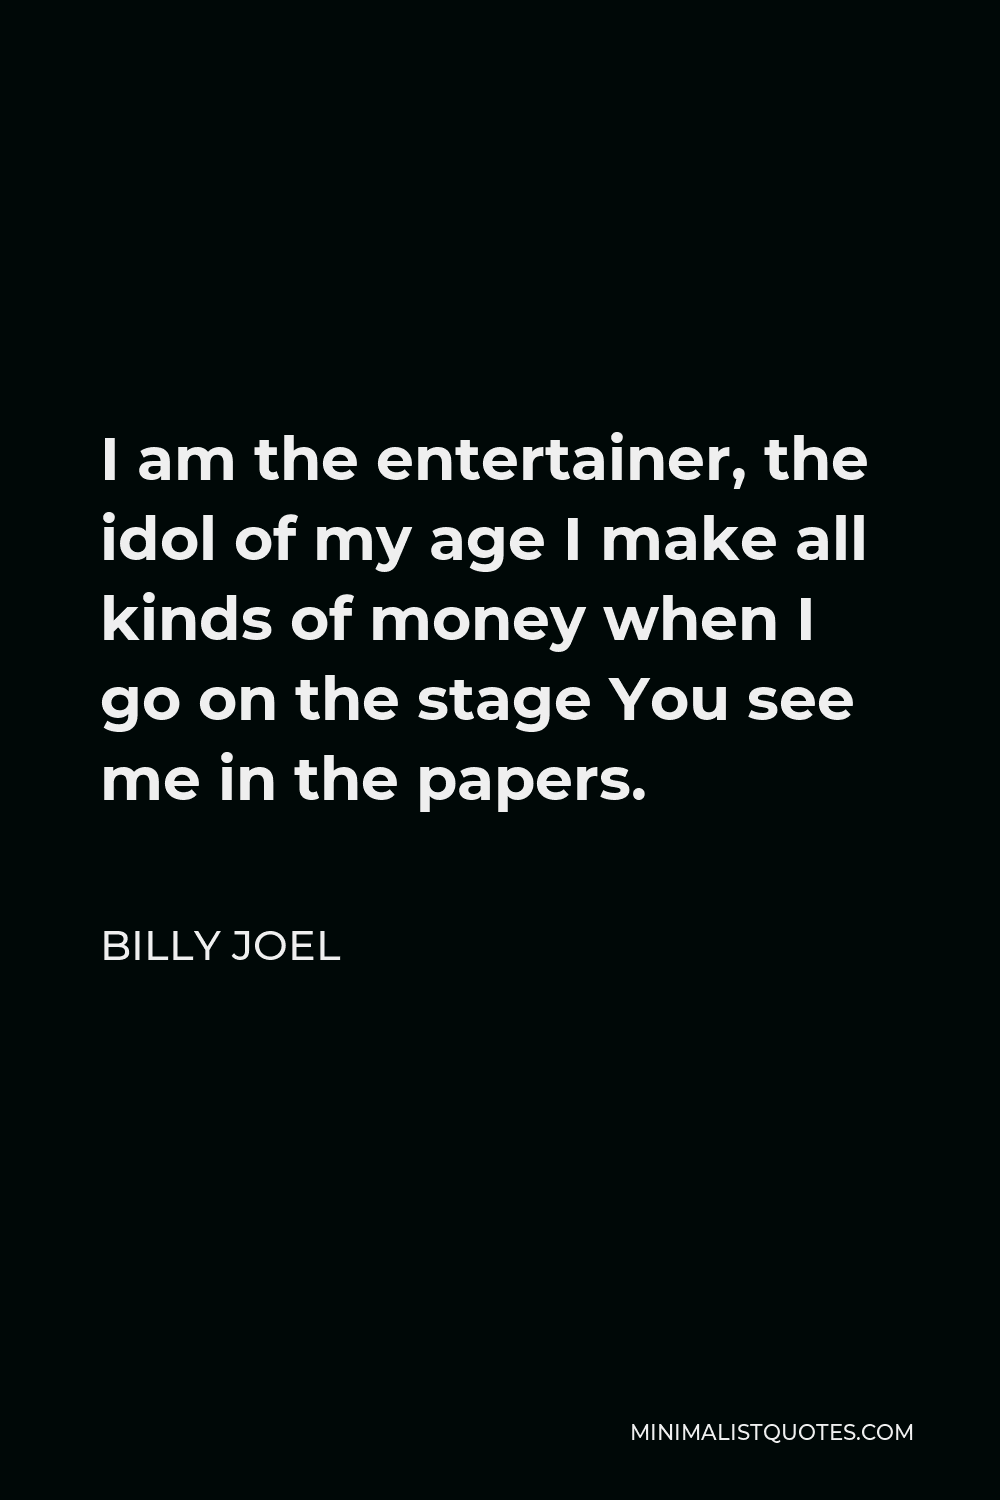 Billy Joel Quote - I am the entertainer, the idol of my age I make all kinds of money when I go on the stage You see me in the papers.